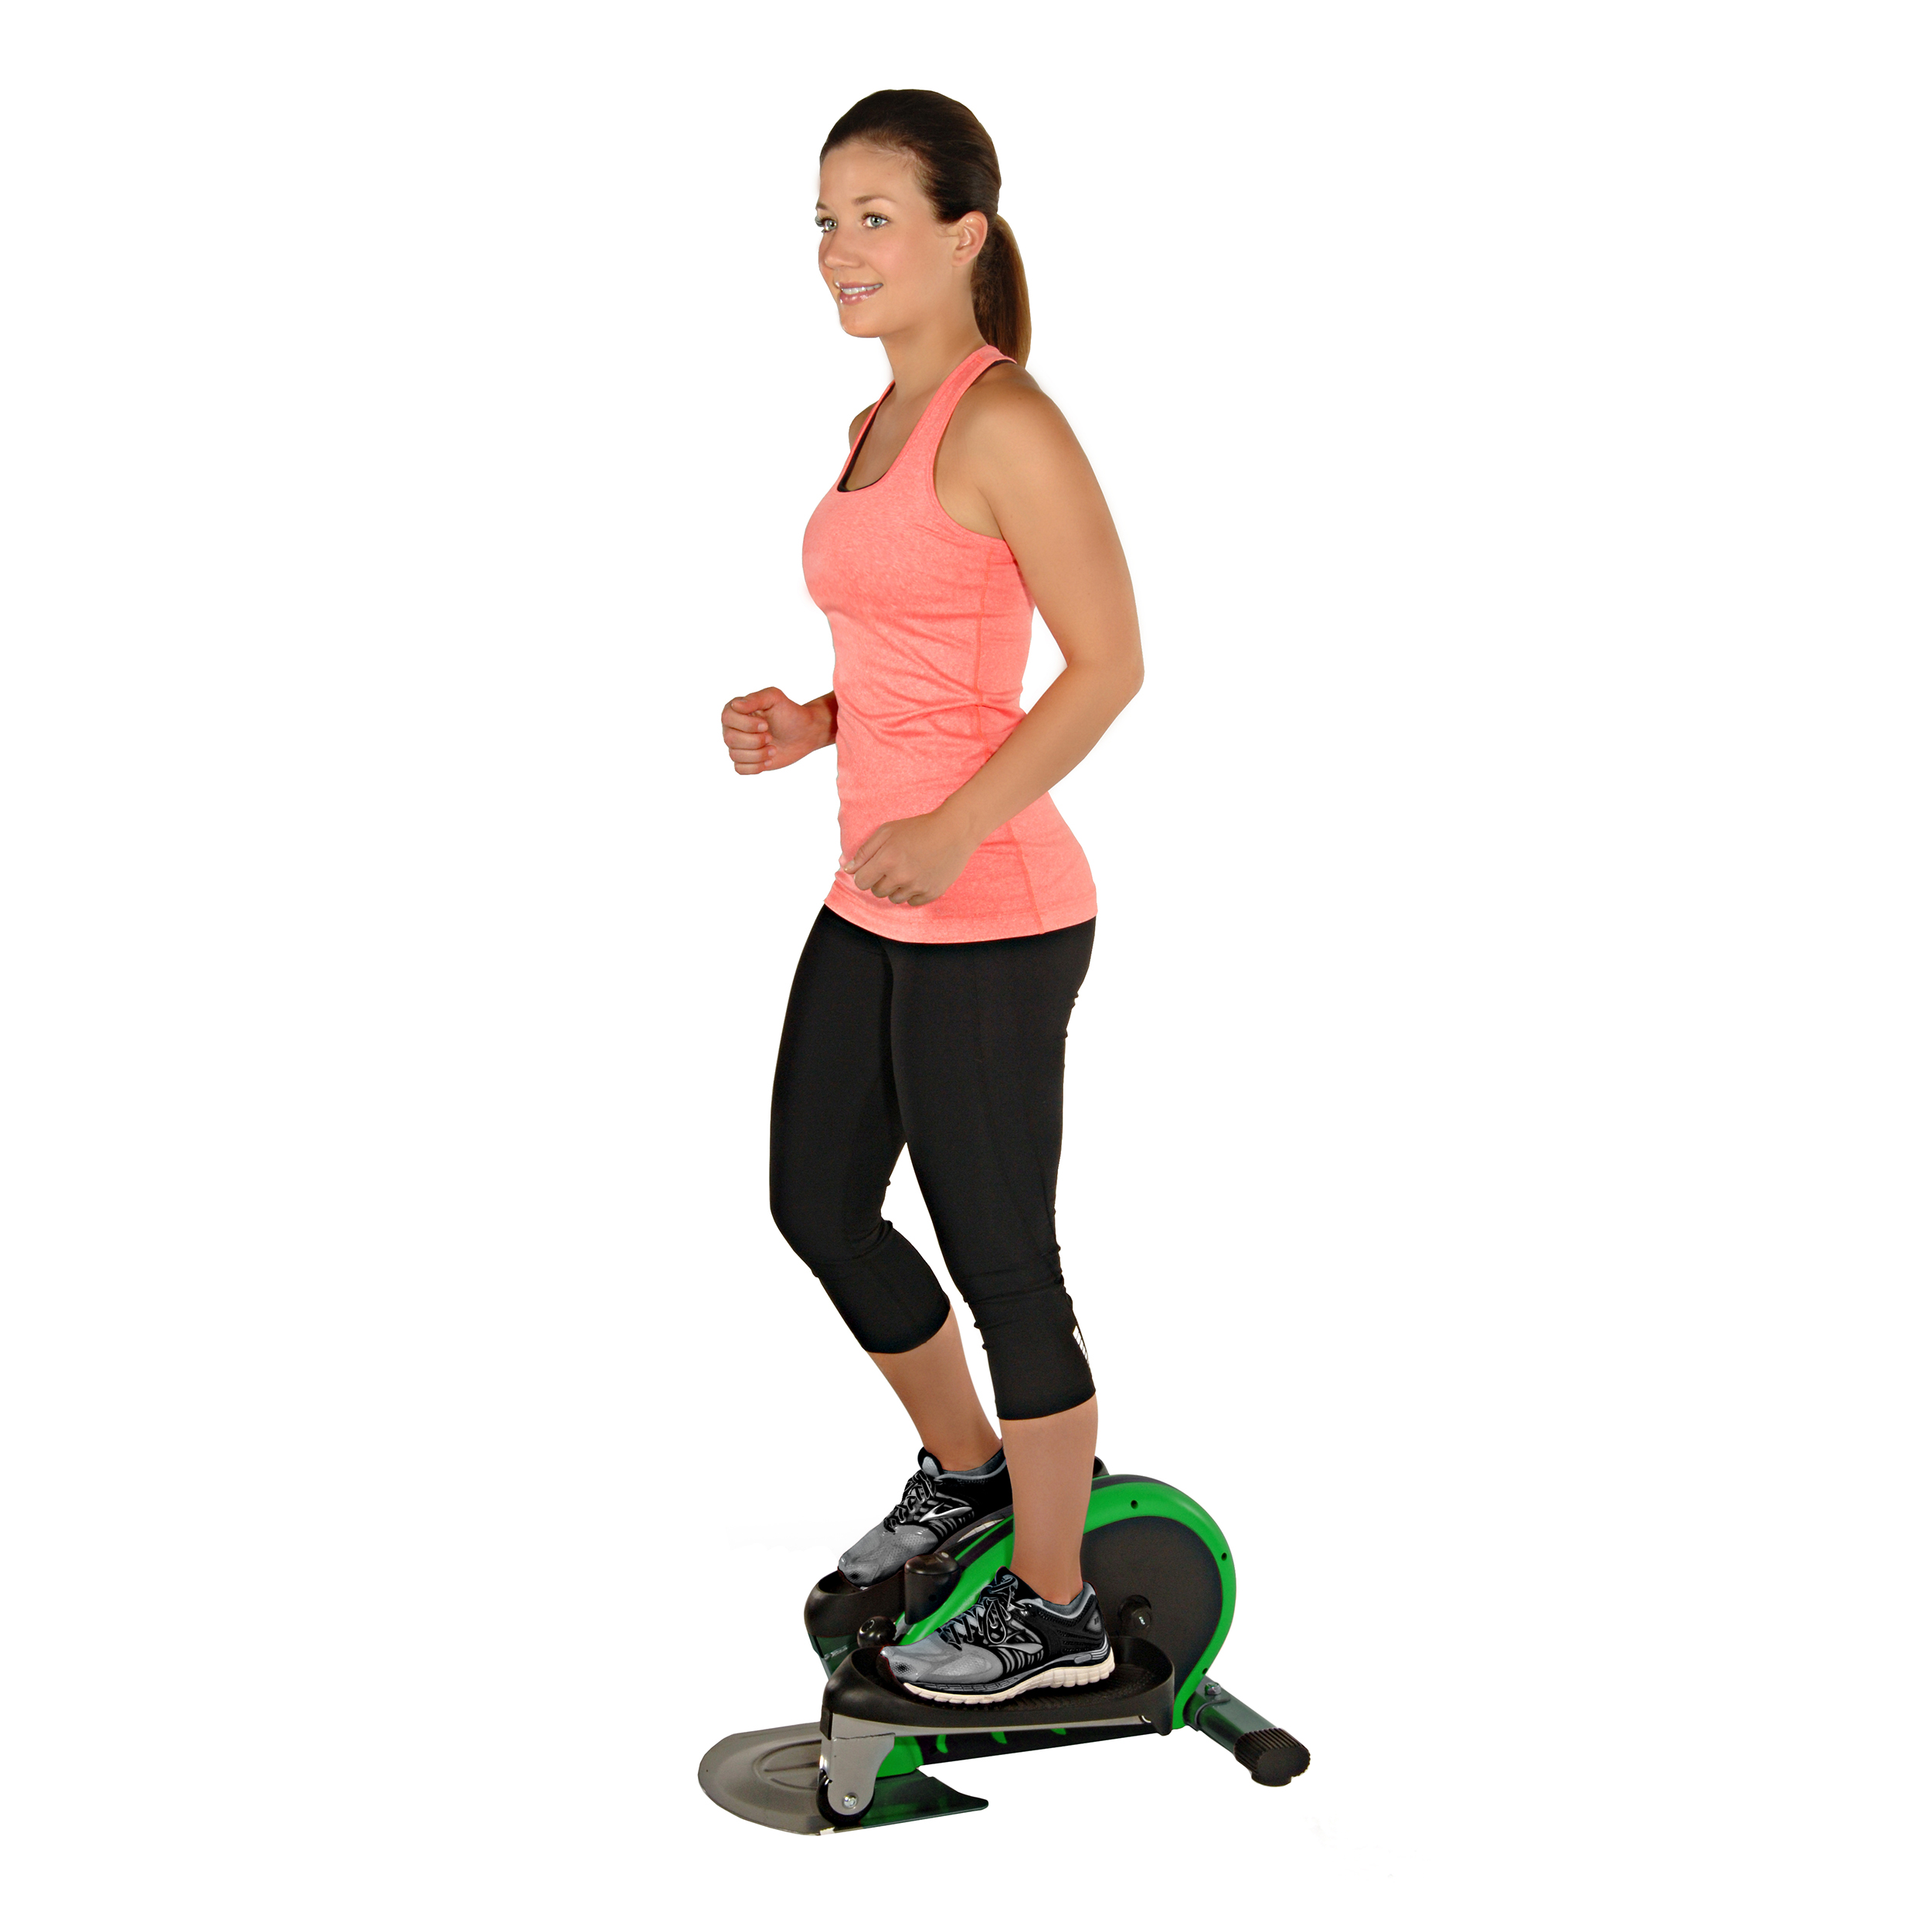 Stamina InMotion E-1000 Mini Elliptical Trainer, Adjustable Tension Resistance, 250 lb. Weight Limit, Green - image 3 of 5